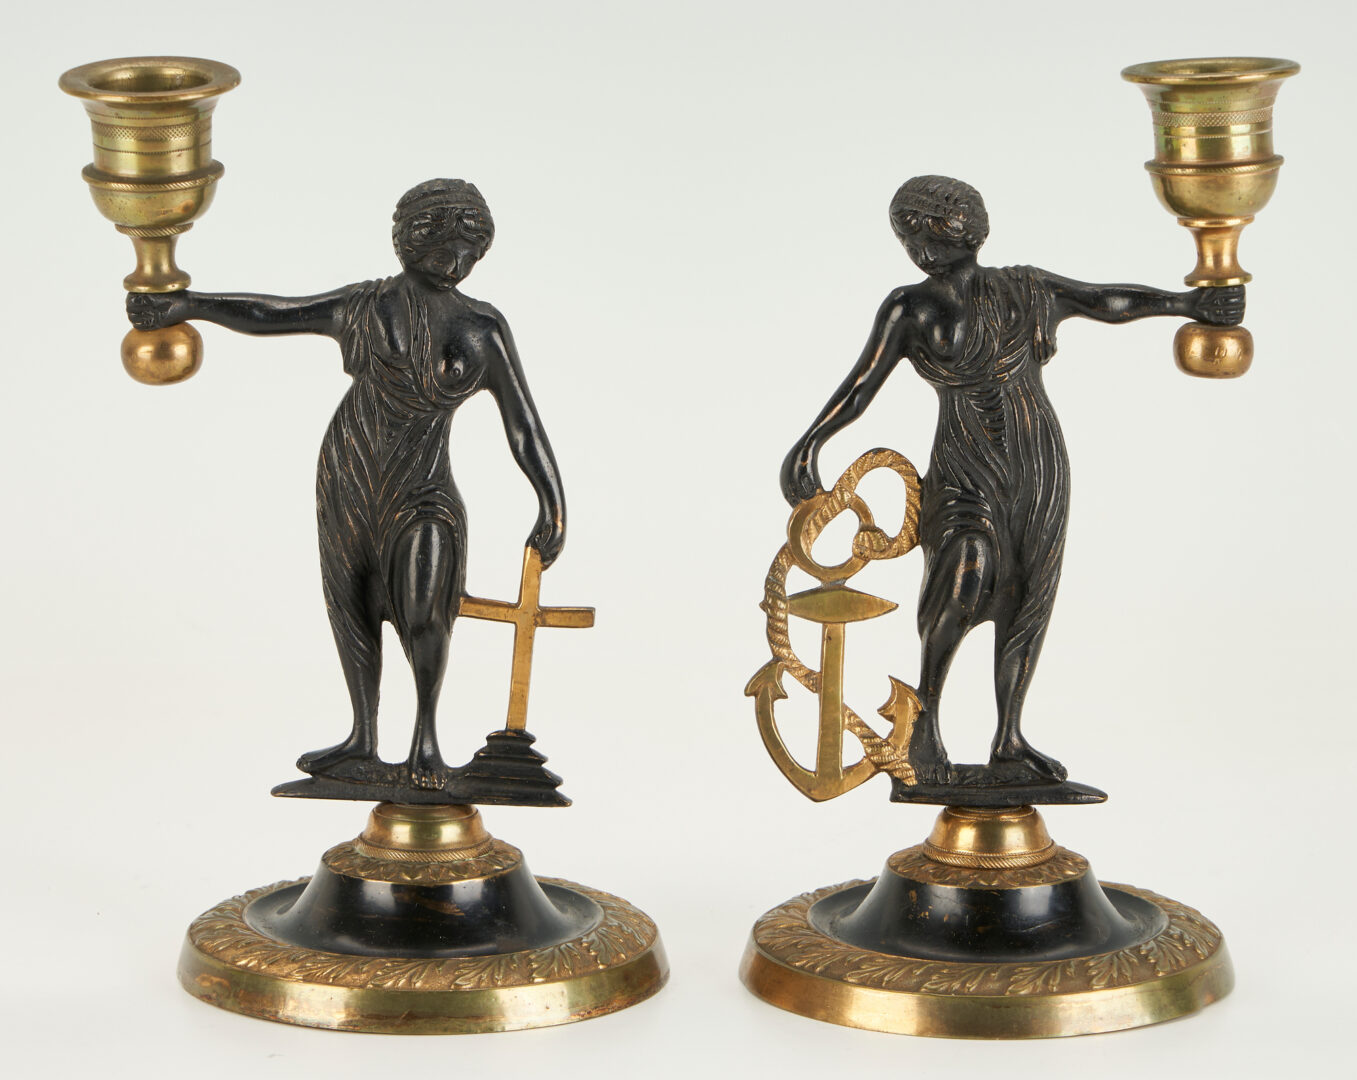 Lot 374: 4 Neoclassical Accessories: Urn, Shell Dish, & Figural Candlesticks